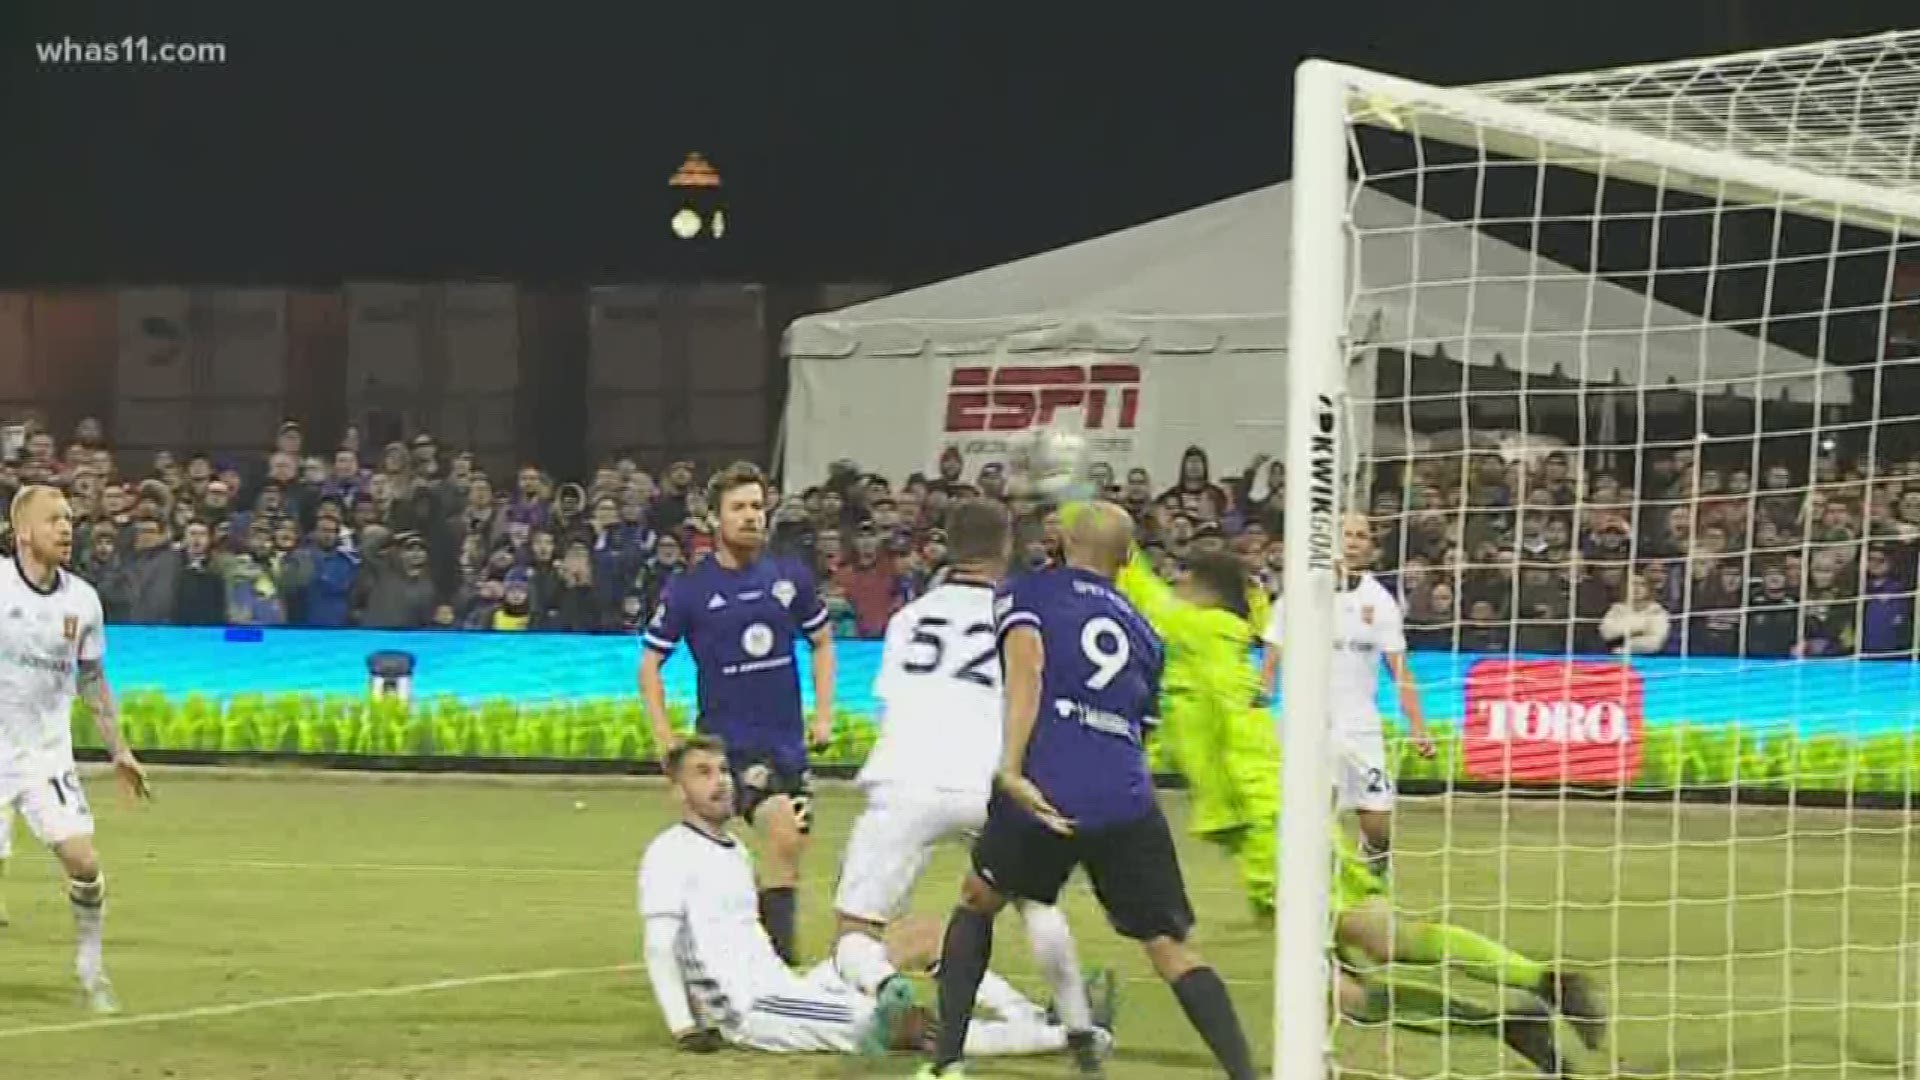 Louisville City FC came up short in their quest for a third straight title. The Monarchs beat Lou City FC 3-1.